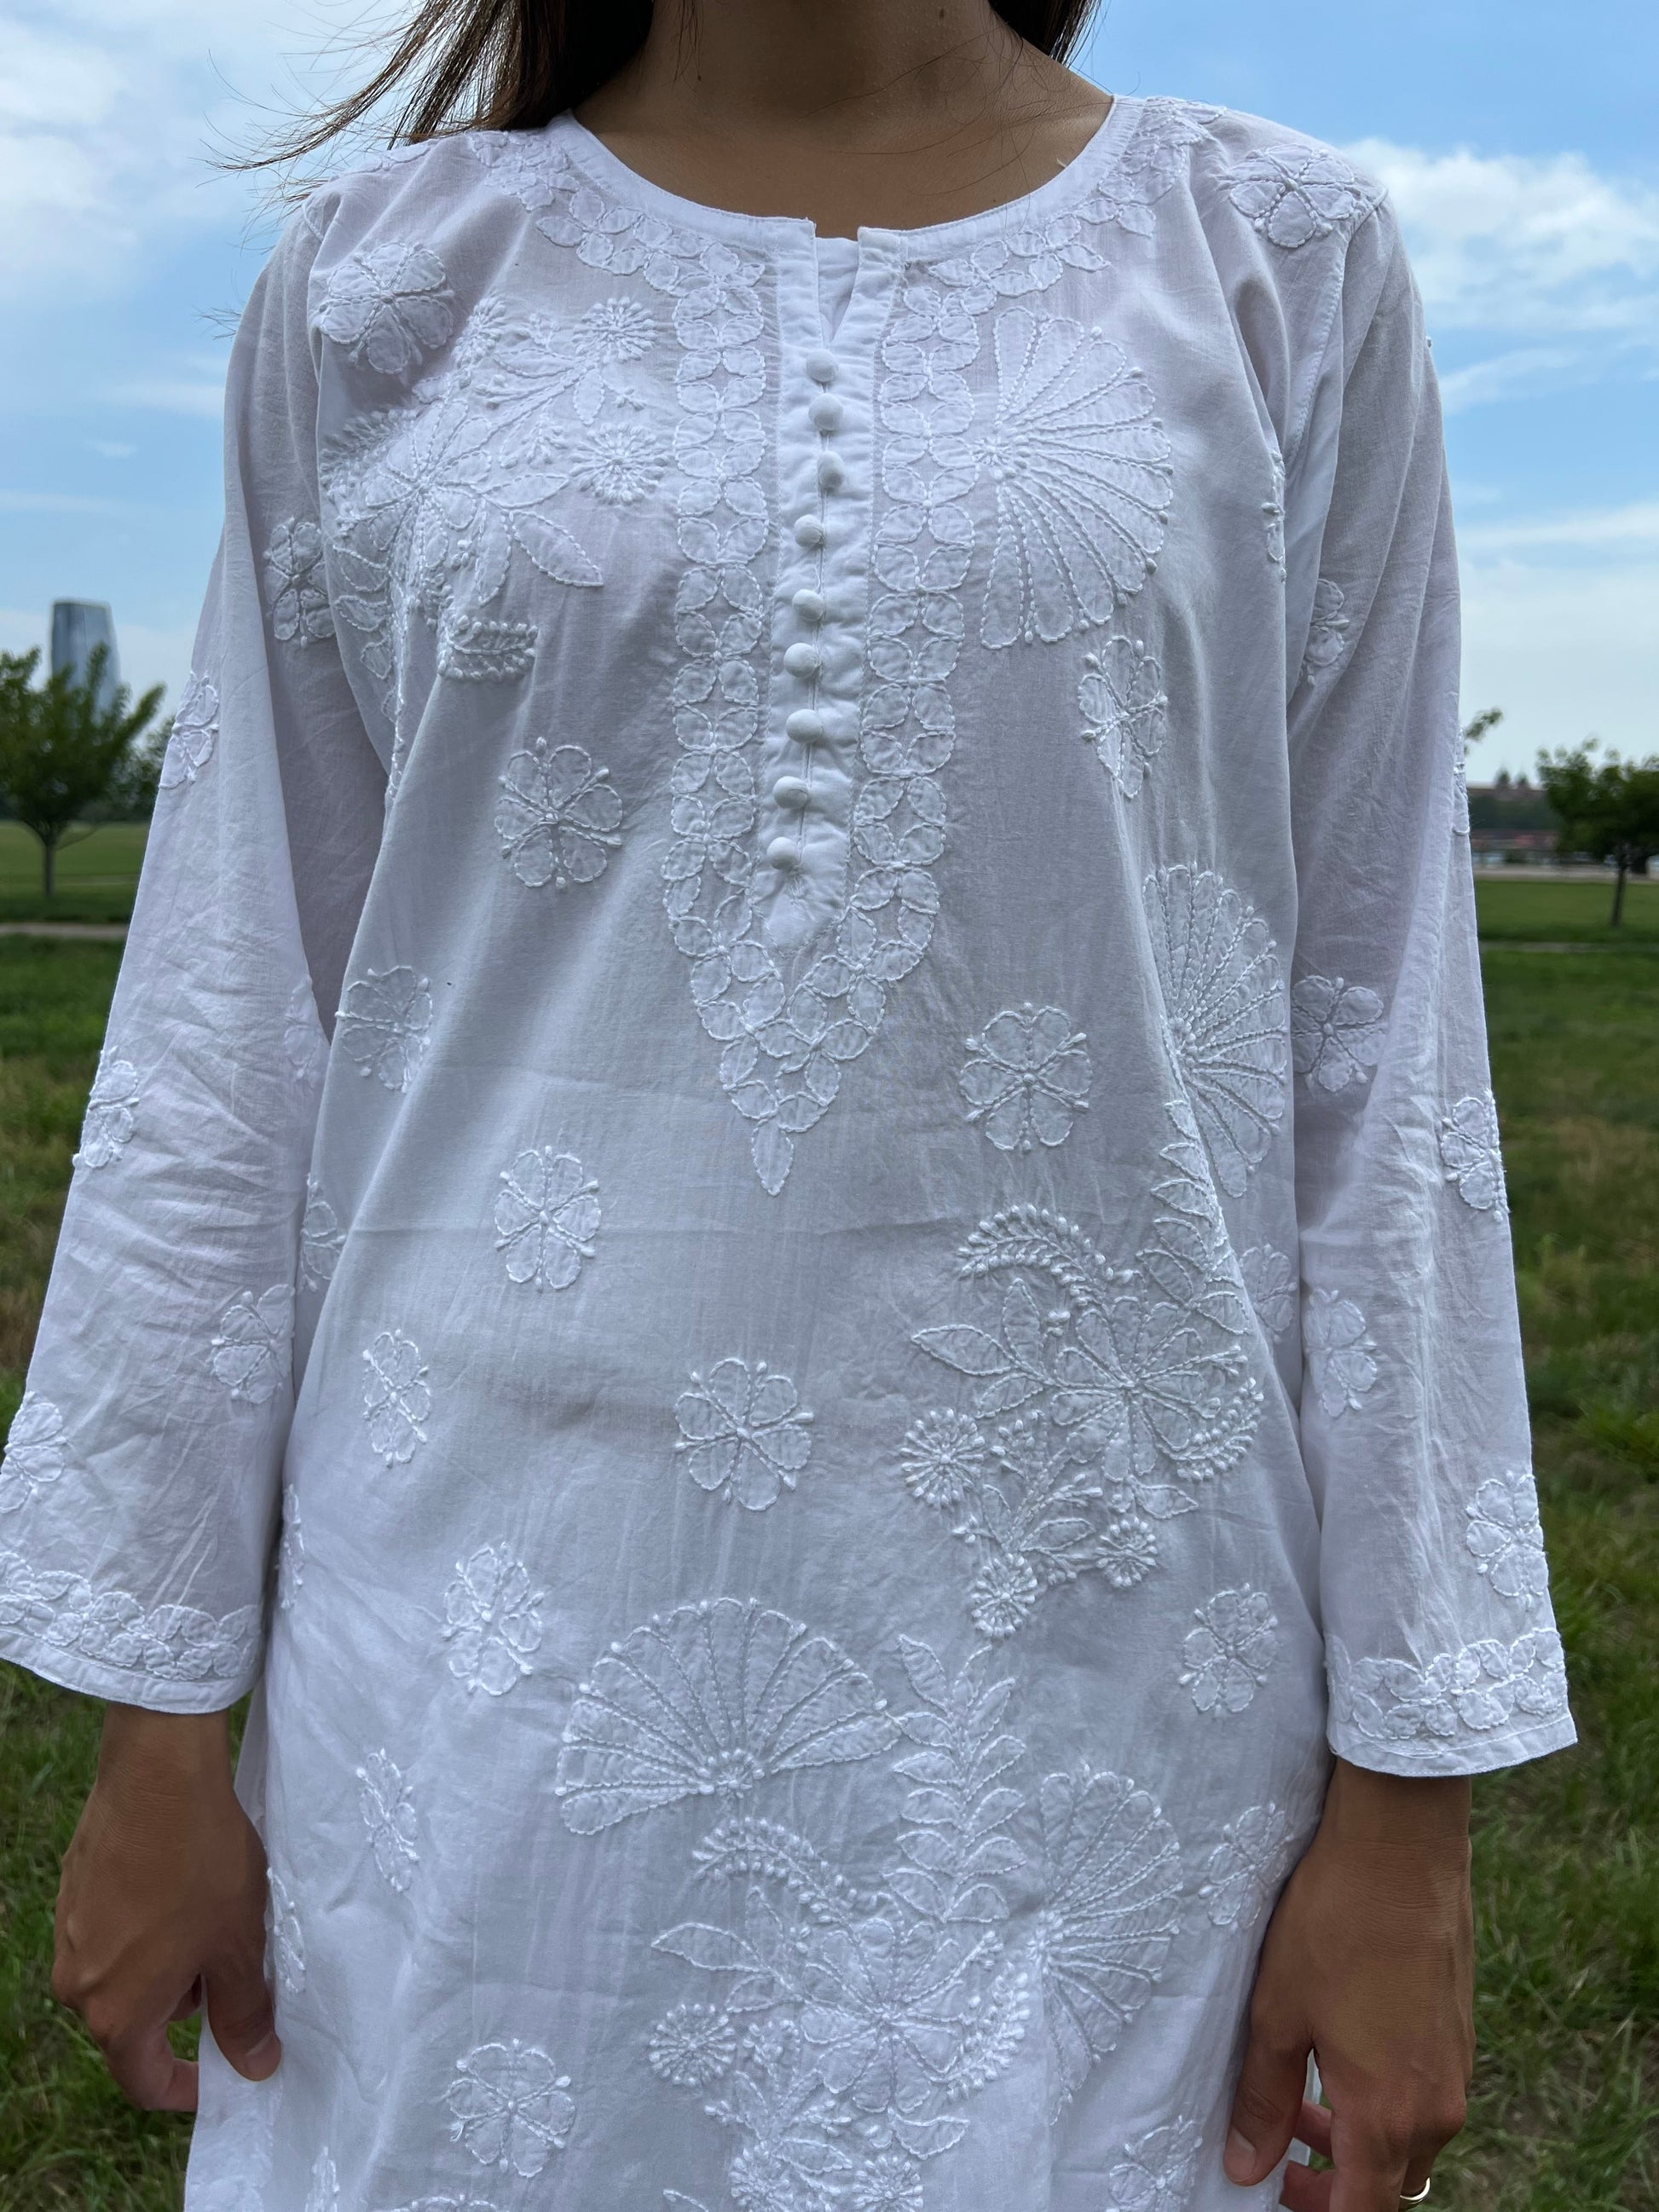 Detailed chikankari in neckline with white threads and potli buttons 